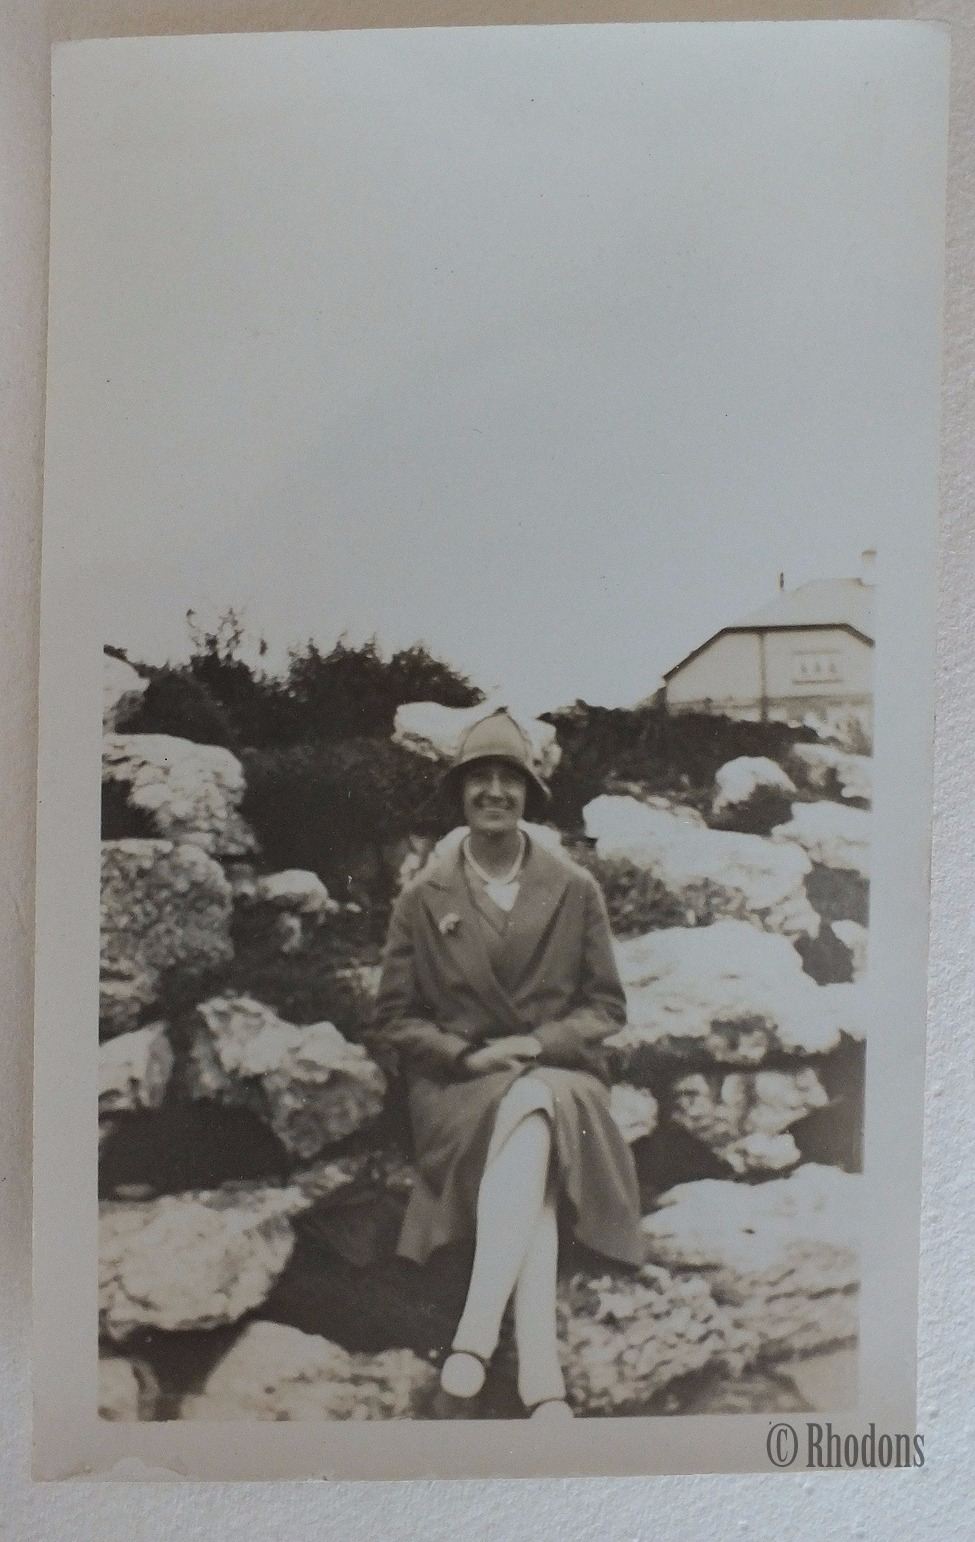 Seated Lady With Cloche Hat - Circa 1920/30s